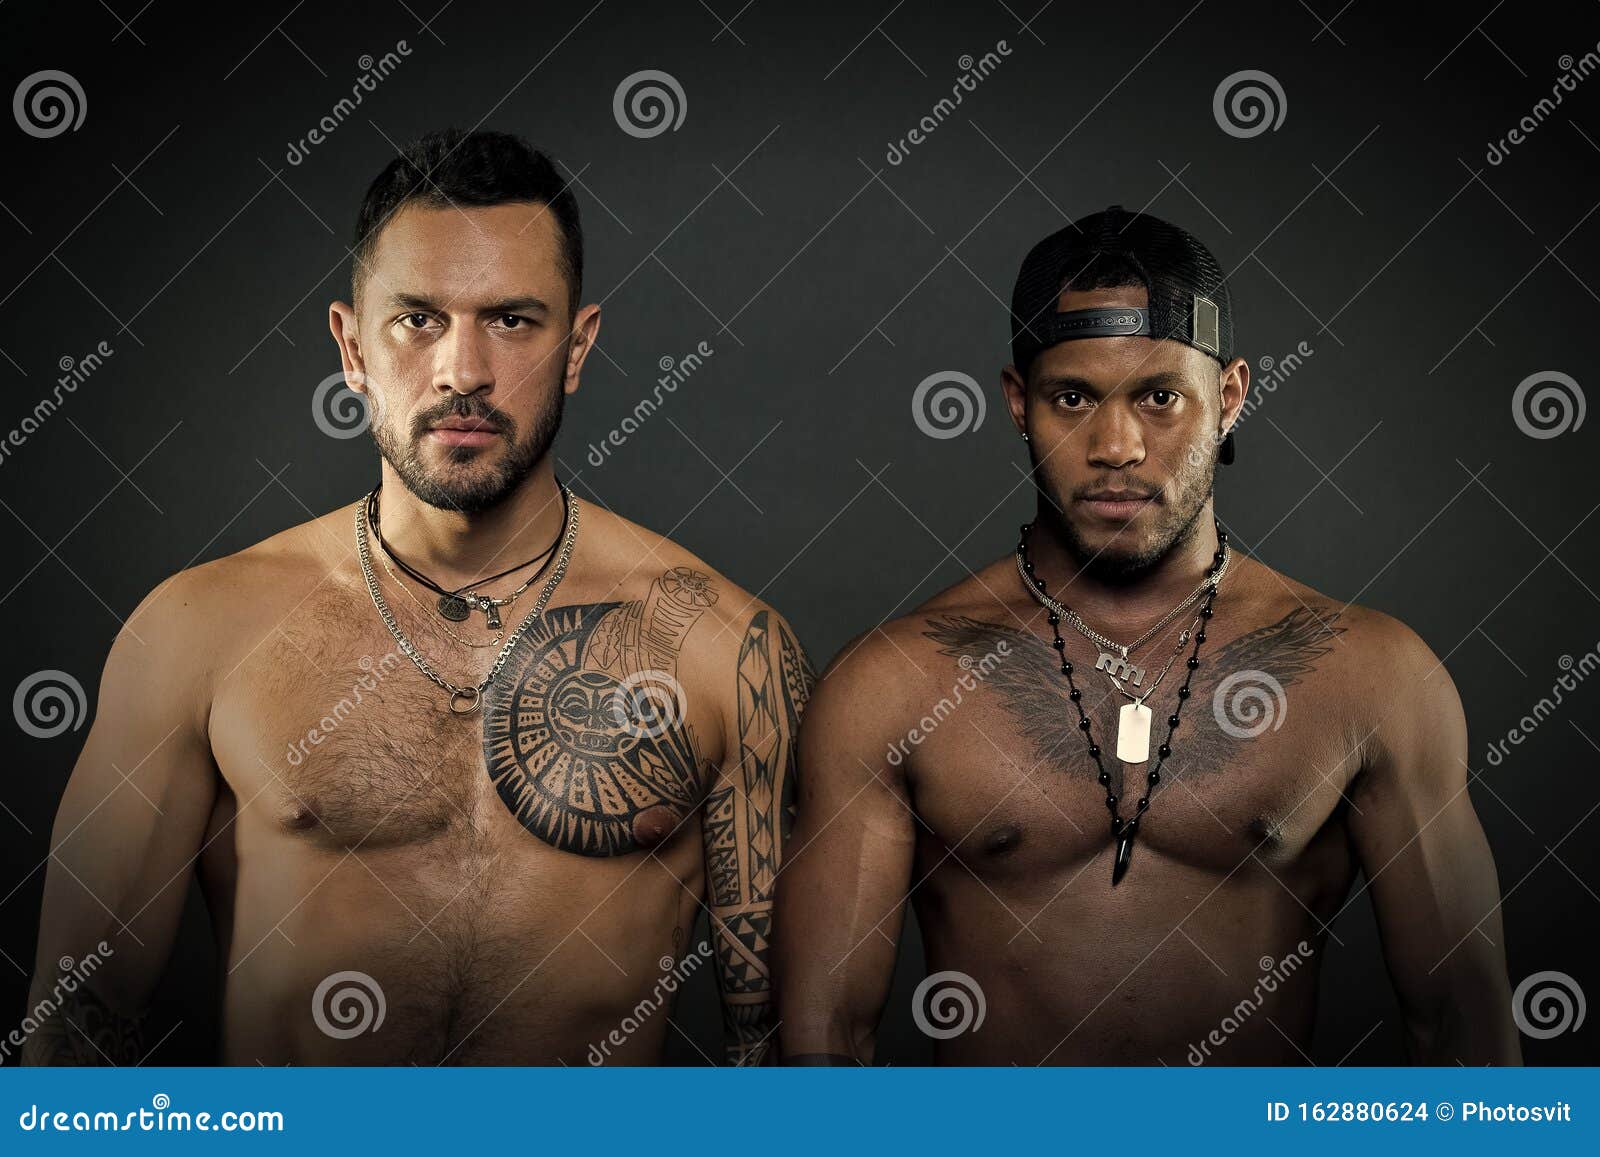 Fashion Models with Serious Faces and Fit Bodies Isolated on Black Background. Caucasian Man with Geometrical Tattoos Stock Photo - Image of serious, chest: 162880624